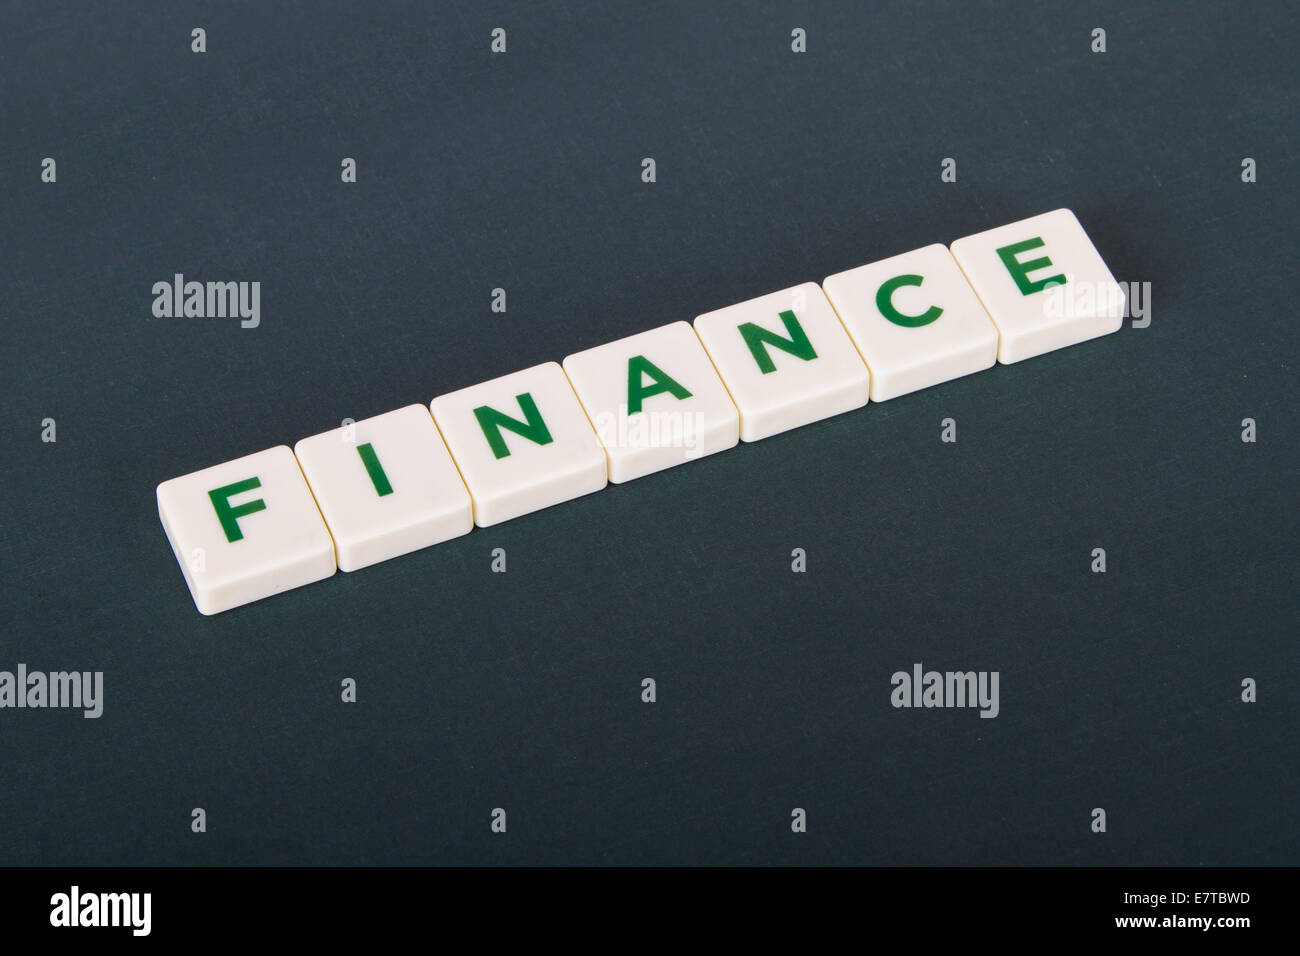 Finance word in letters on background. Stock Photo